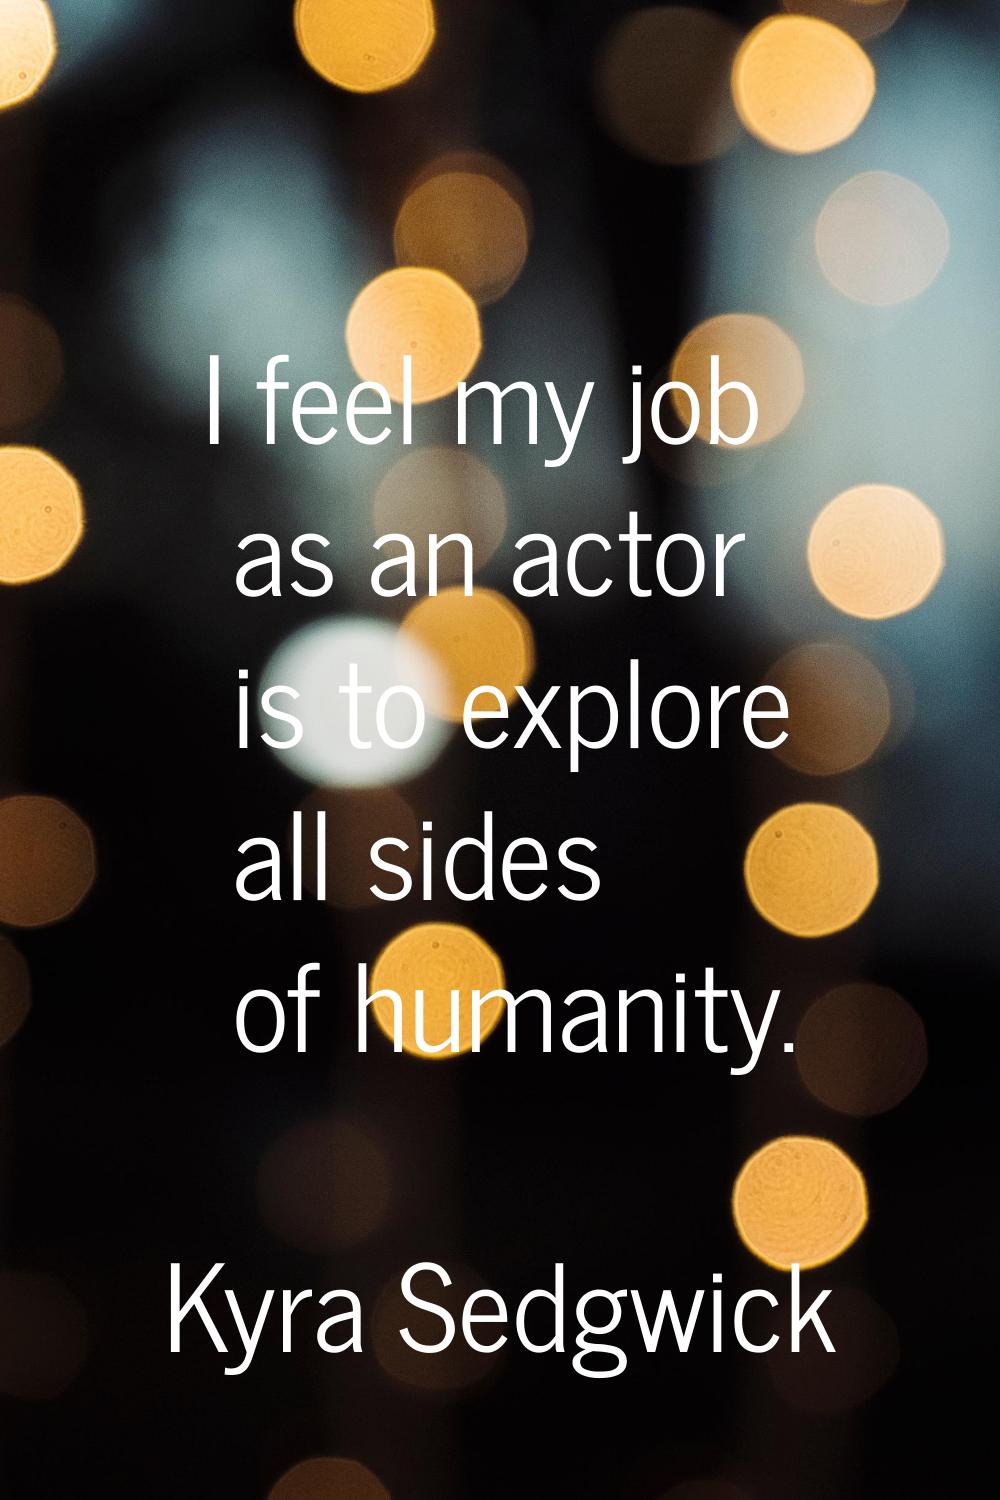 I feel my job as an actor is to explore all sides of humanity.